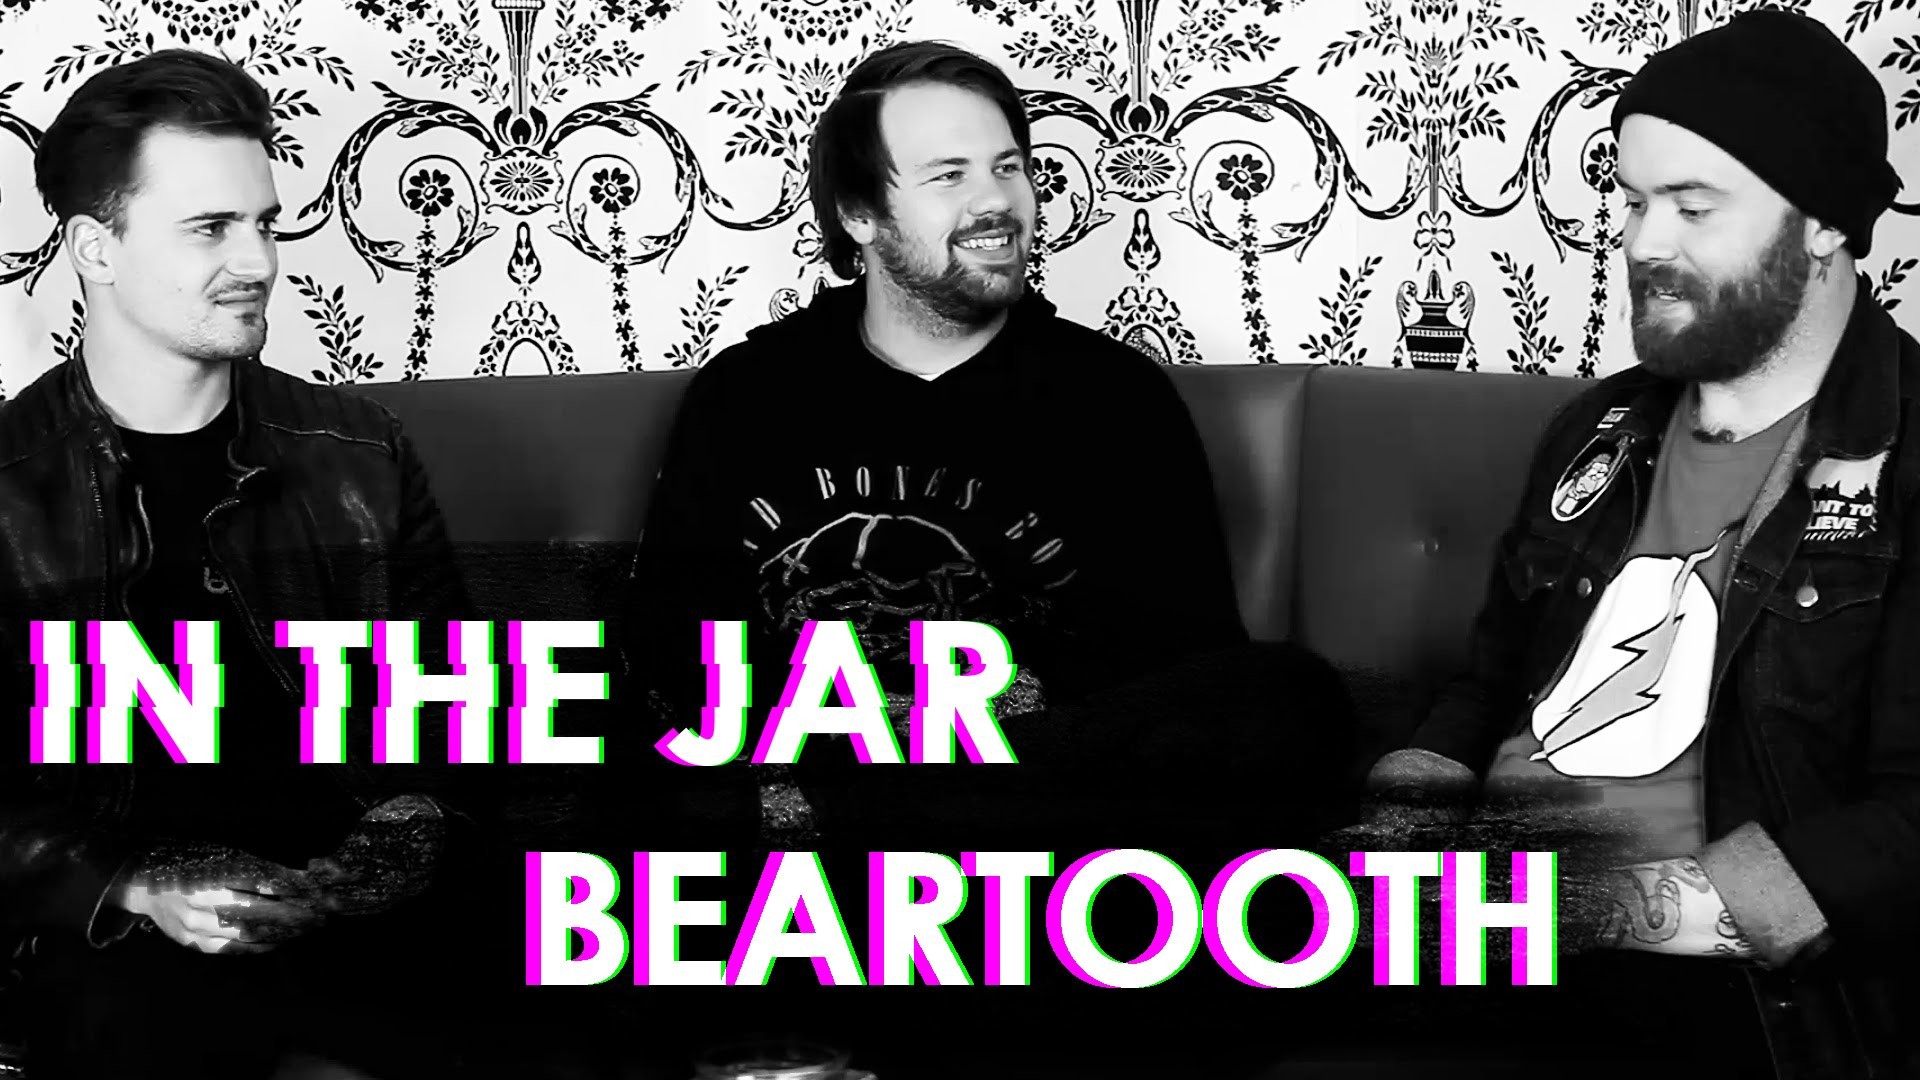 Free download Beartooth Band Wallpaper 67 images [1920x1080] for your